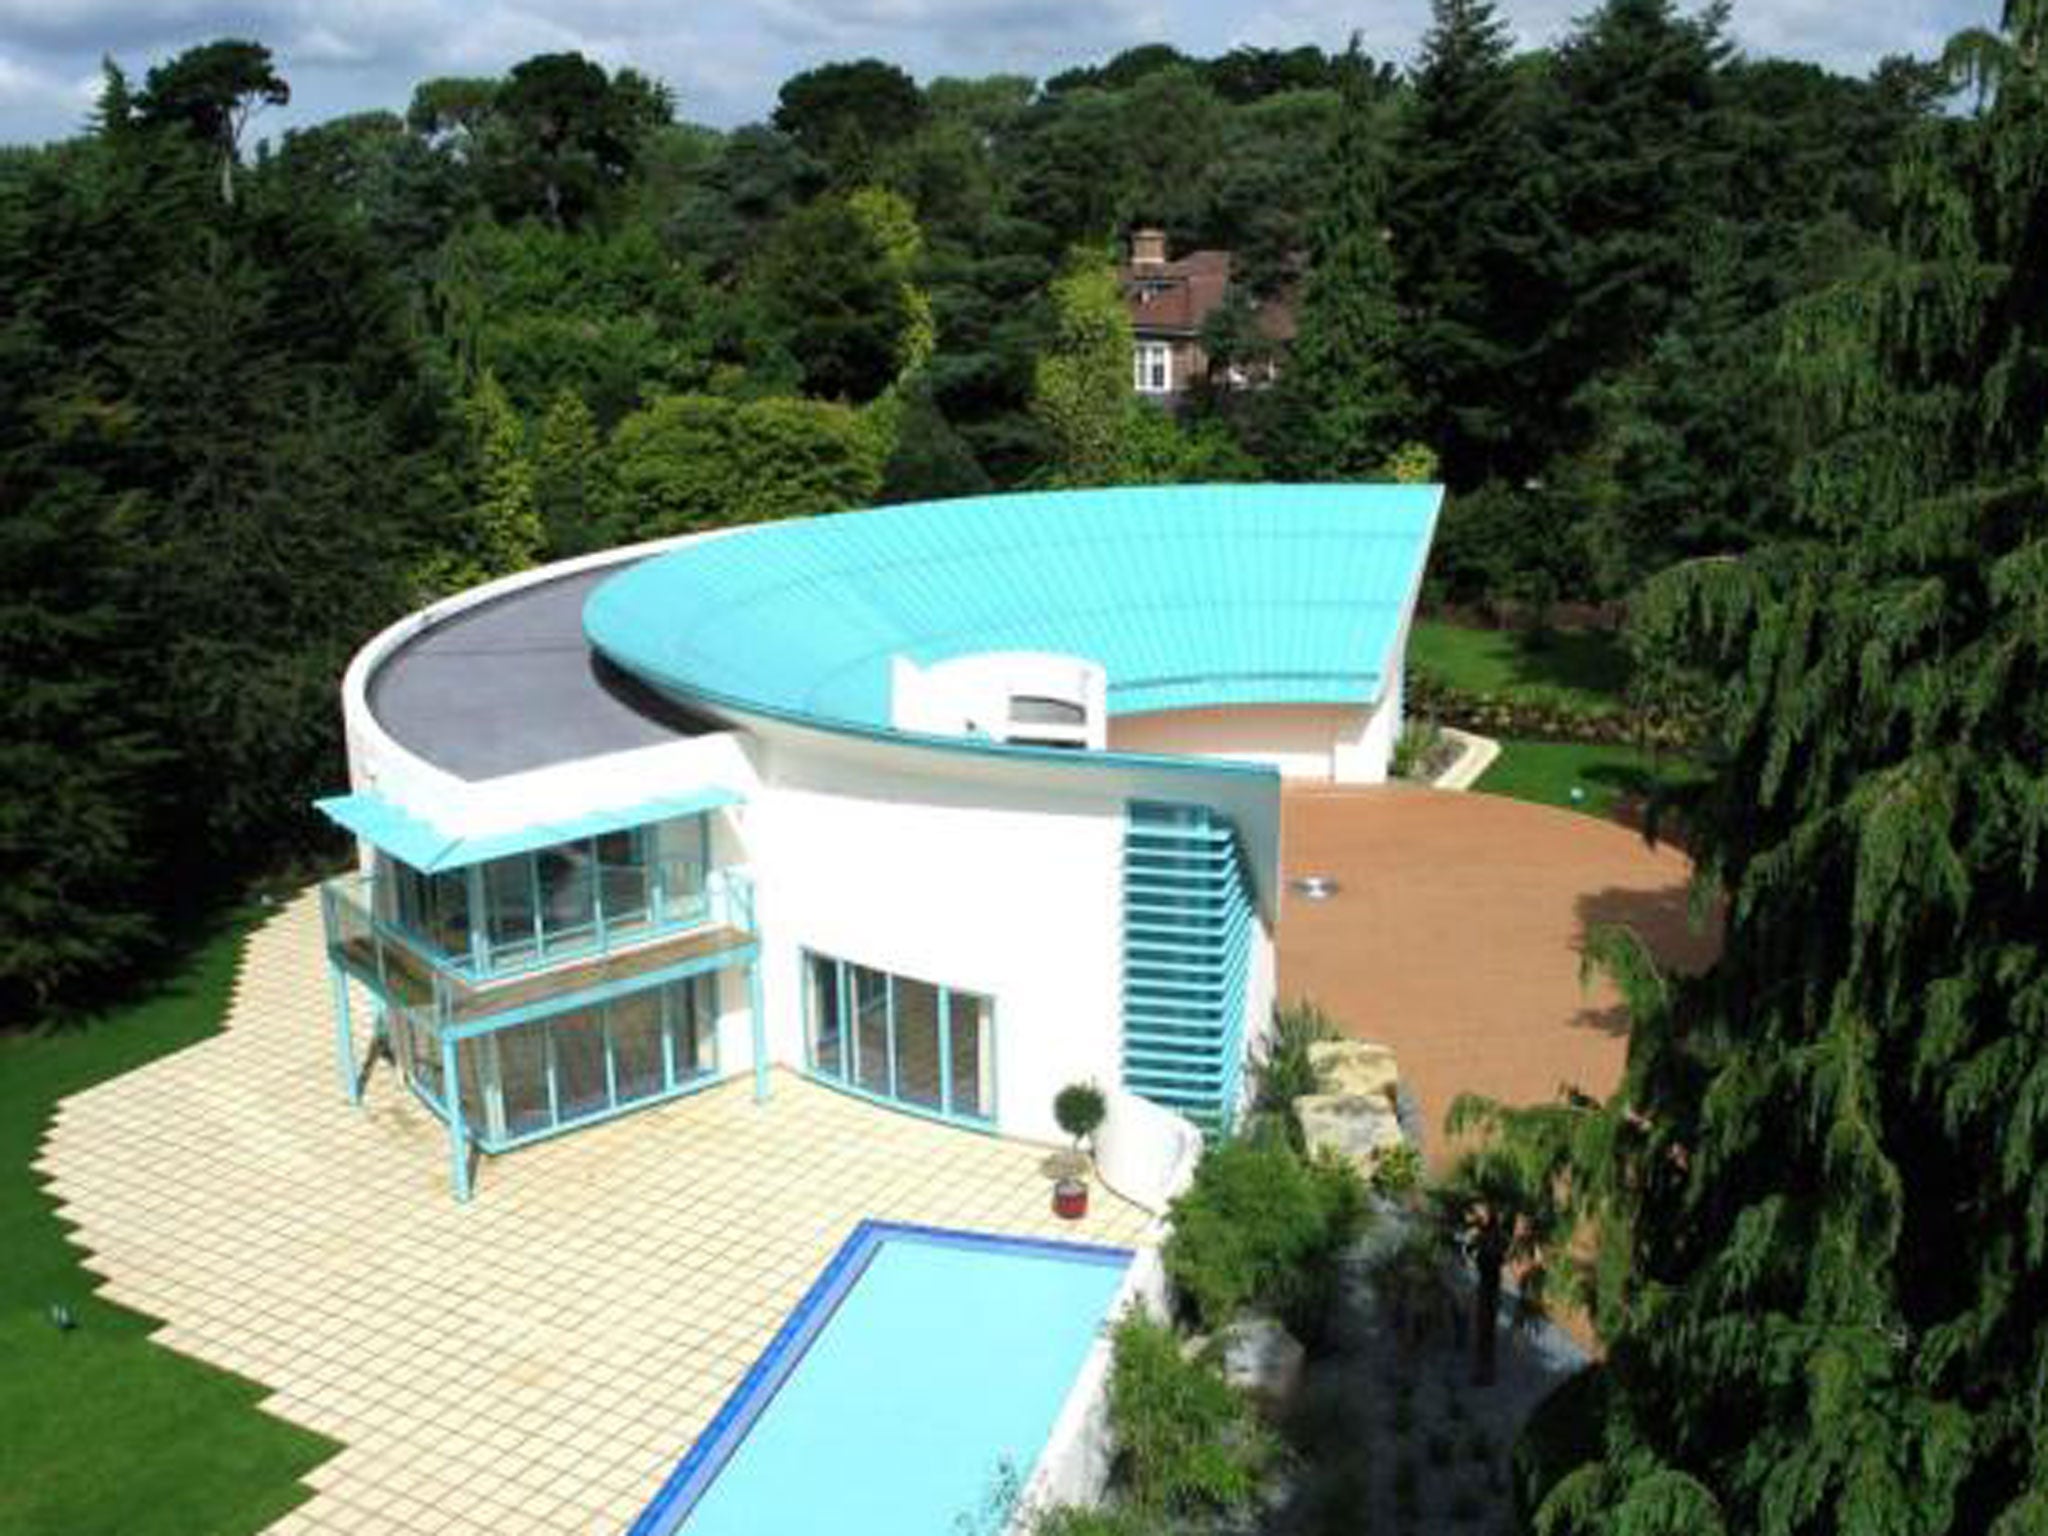 'Thunderbird' house: five bedroom detached house for sale at 
Western Avenue, Branksome Park, Poole, Dorset BH13. On with Sotheby's at a guide price of £2,950,000.